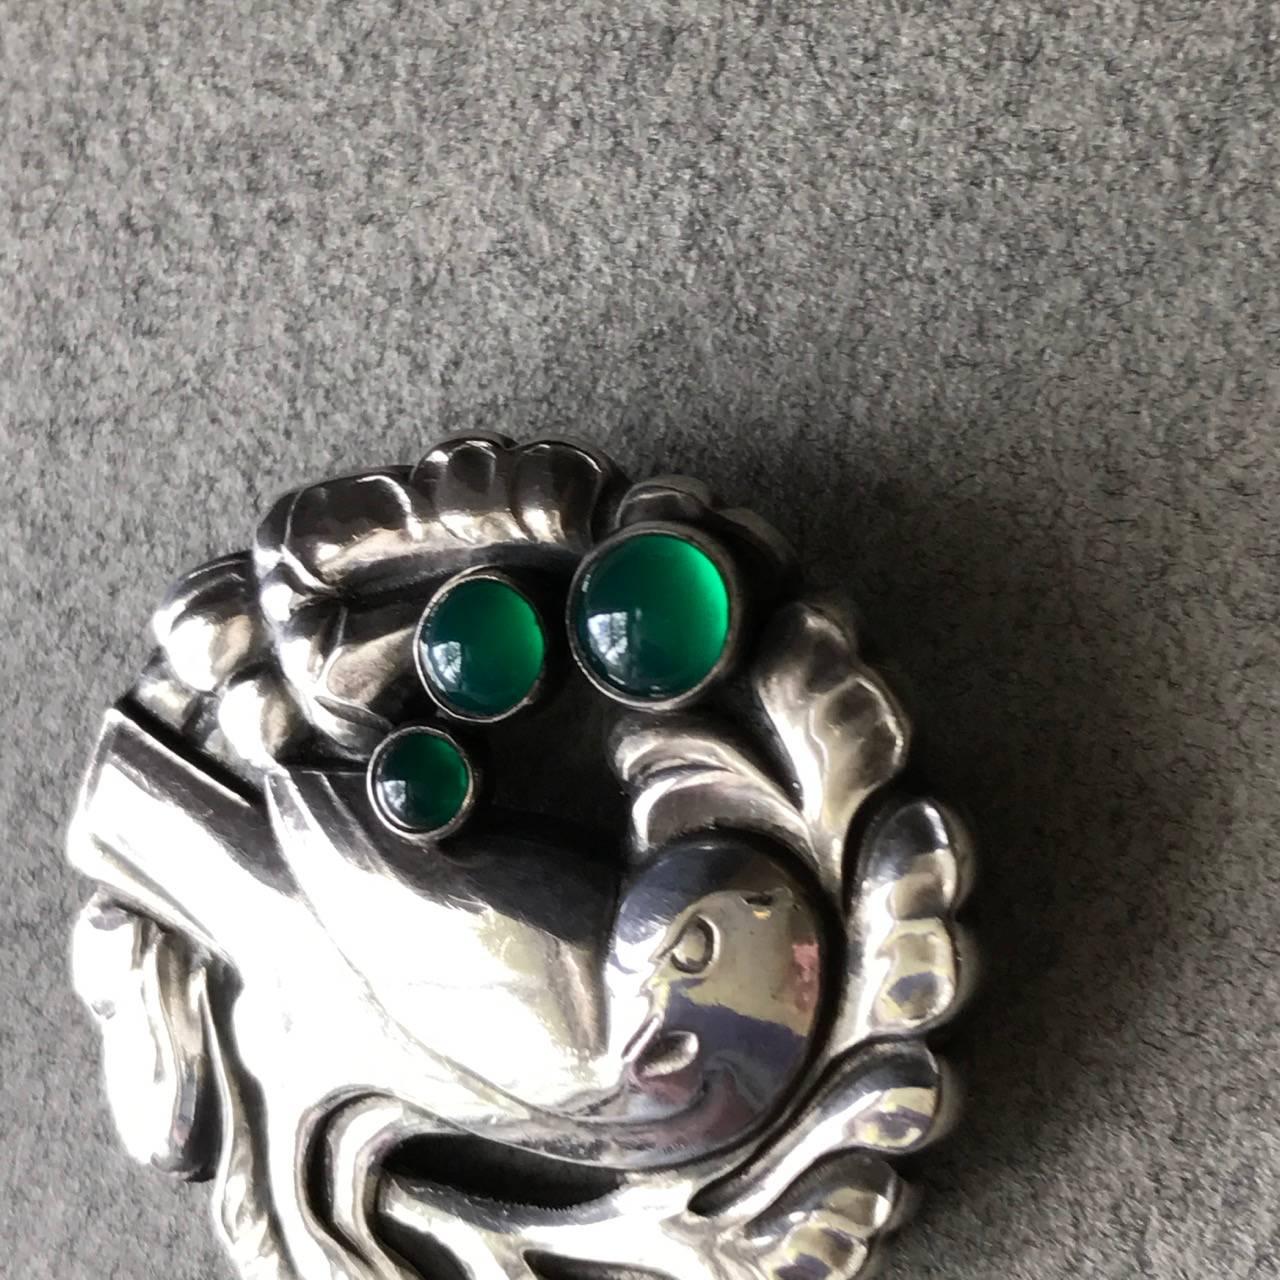 Georg Jensen Dove Brooch No 134 designed by Kristian Mohl-Hansen.

Bright Green Agate Cabochons. Excellent condition.

This is the smaller size of this design.

Complimentary gift box and FREE shipping included.
